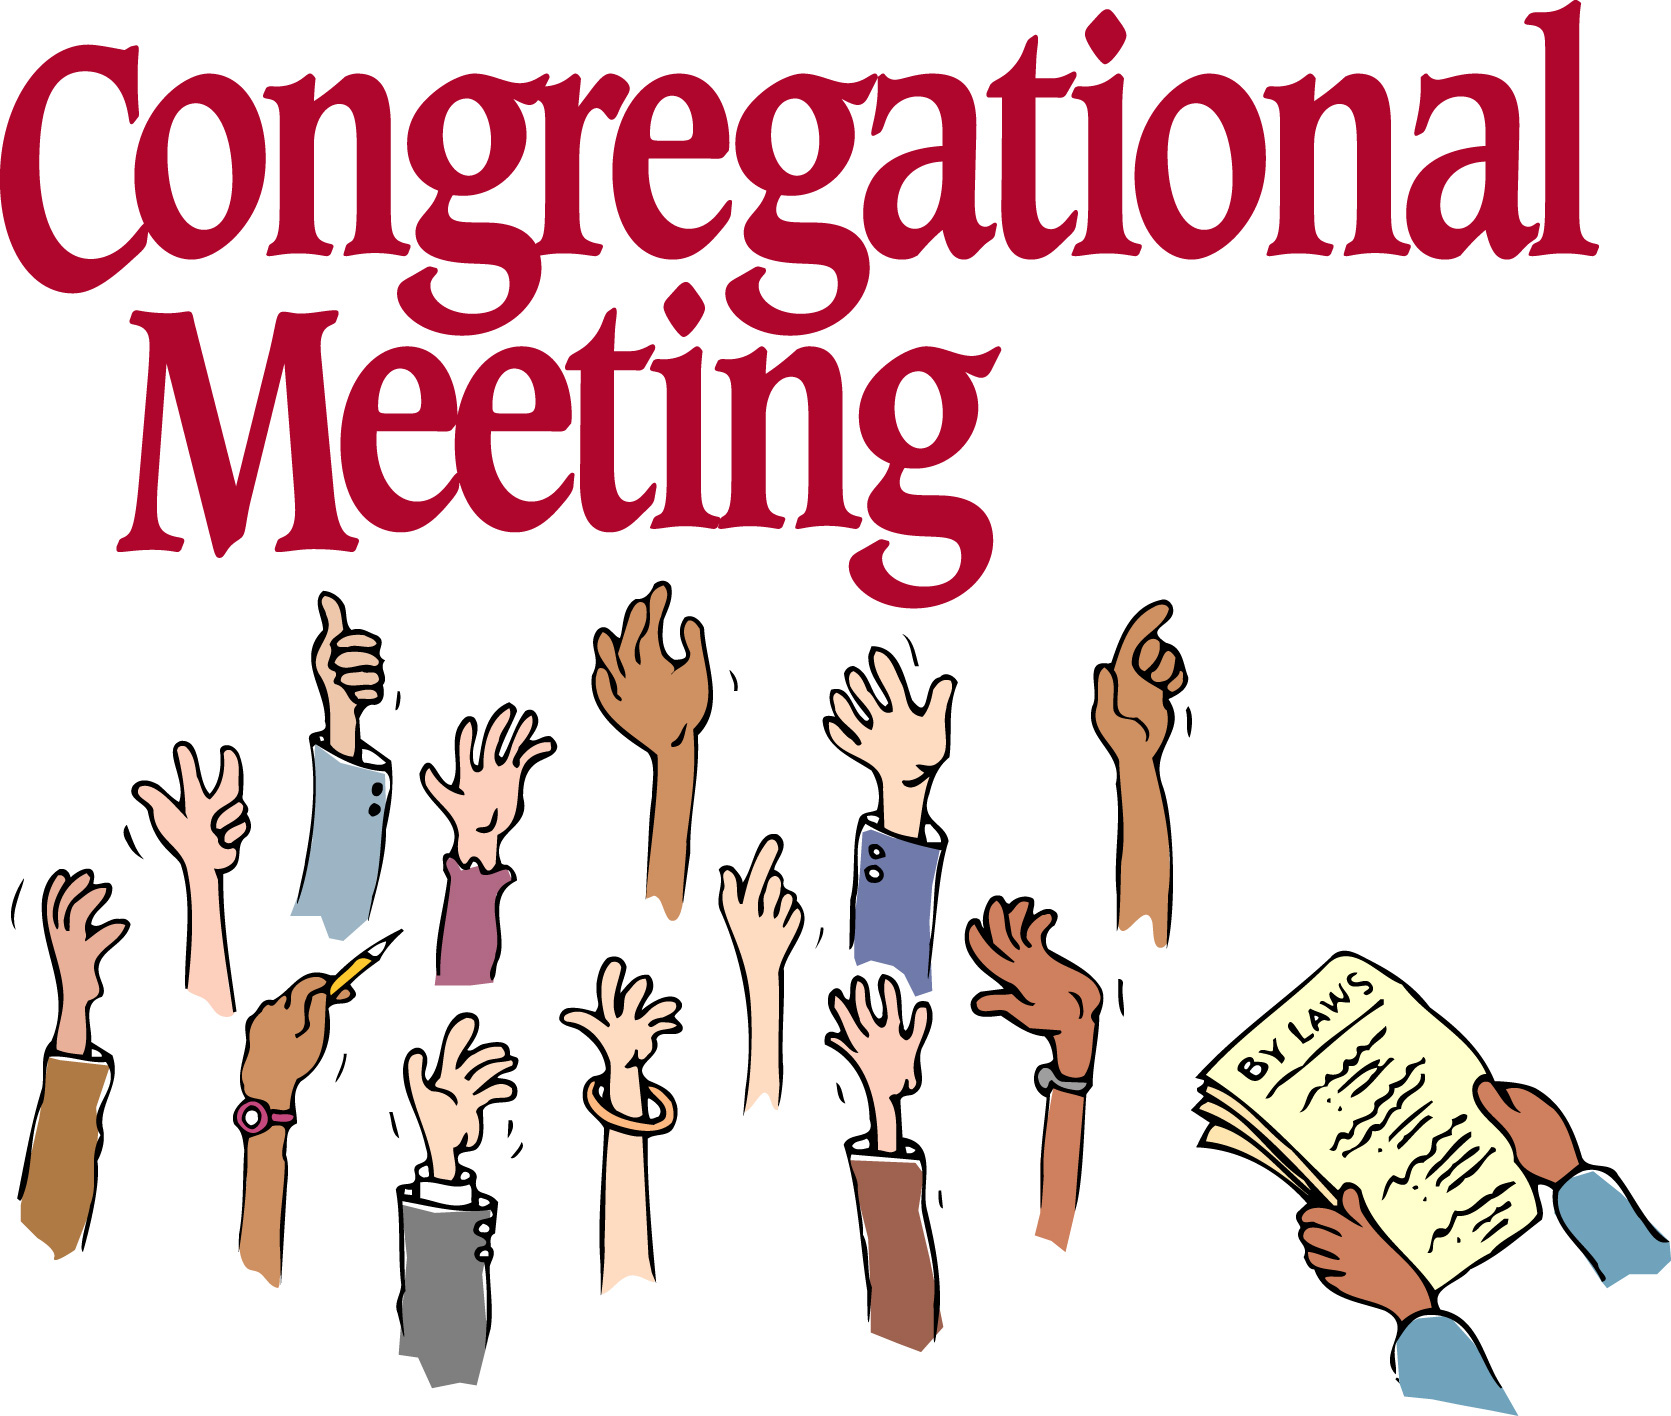 Congregational Meeting graphic